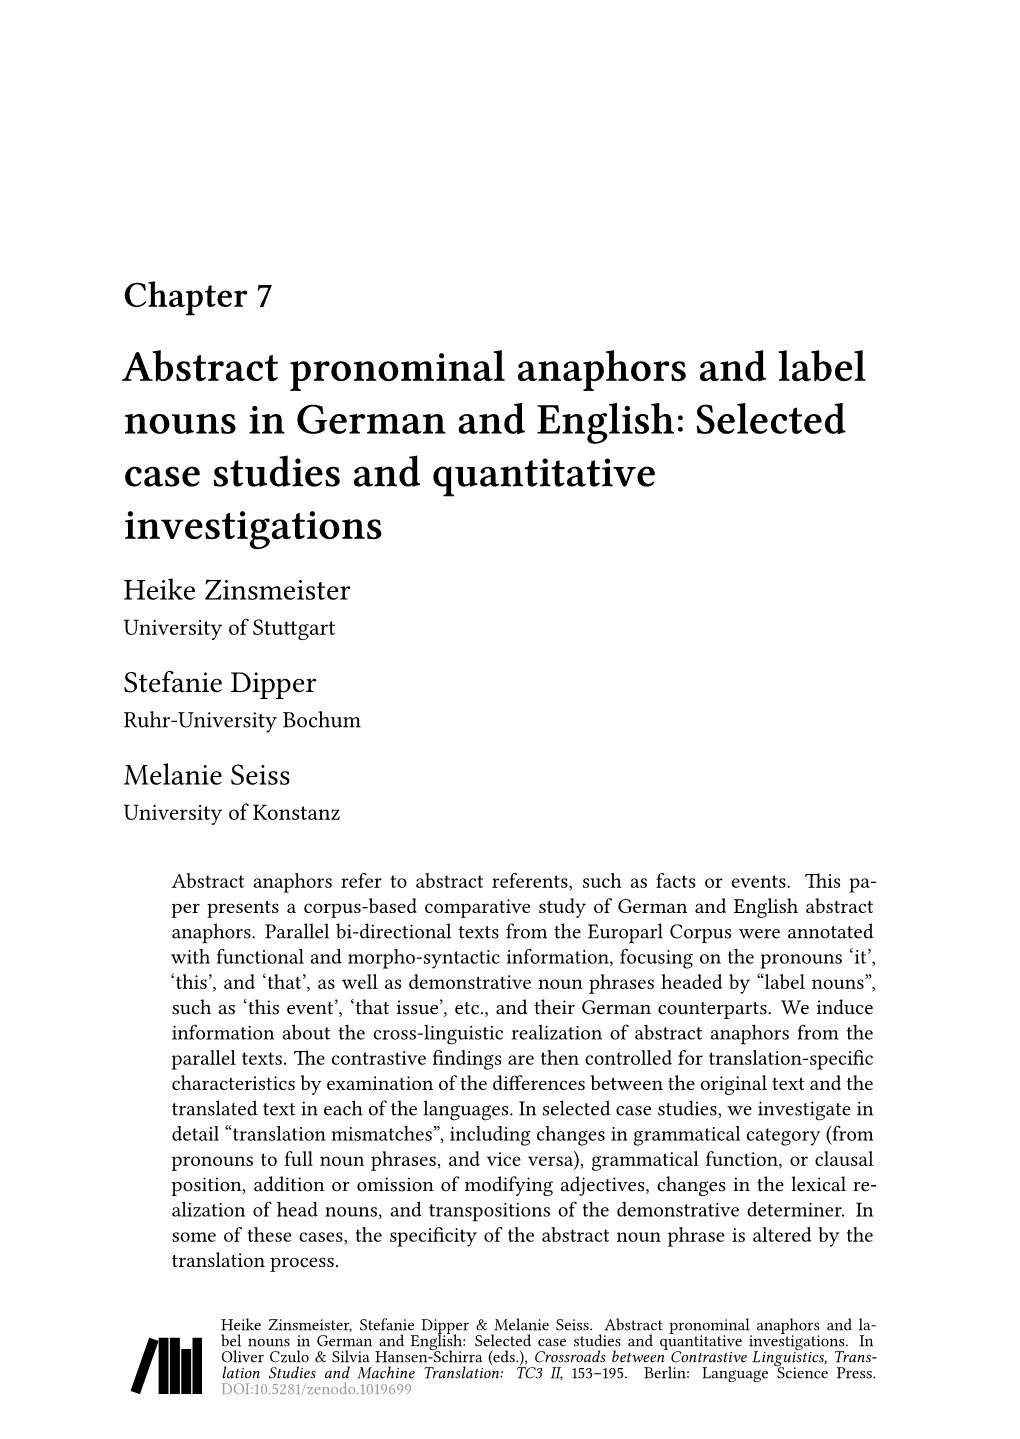 Abstract Pronominal Anaphors and Label Nouns in German and English